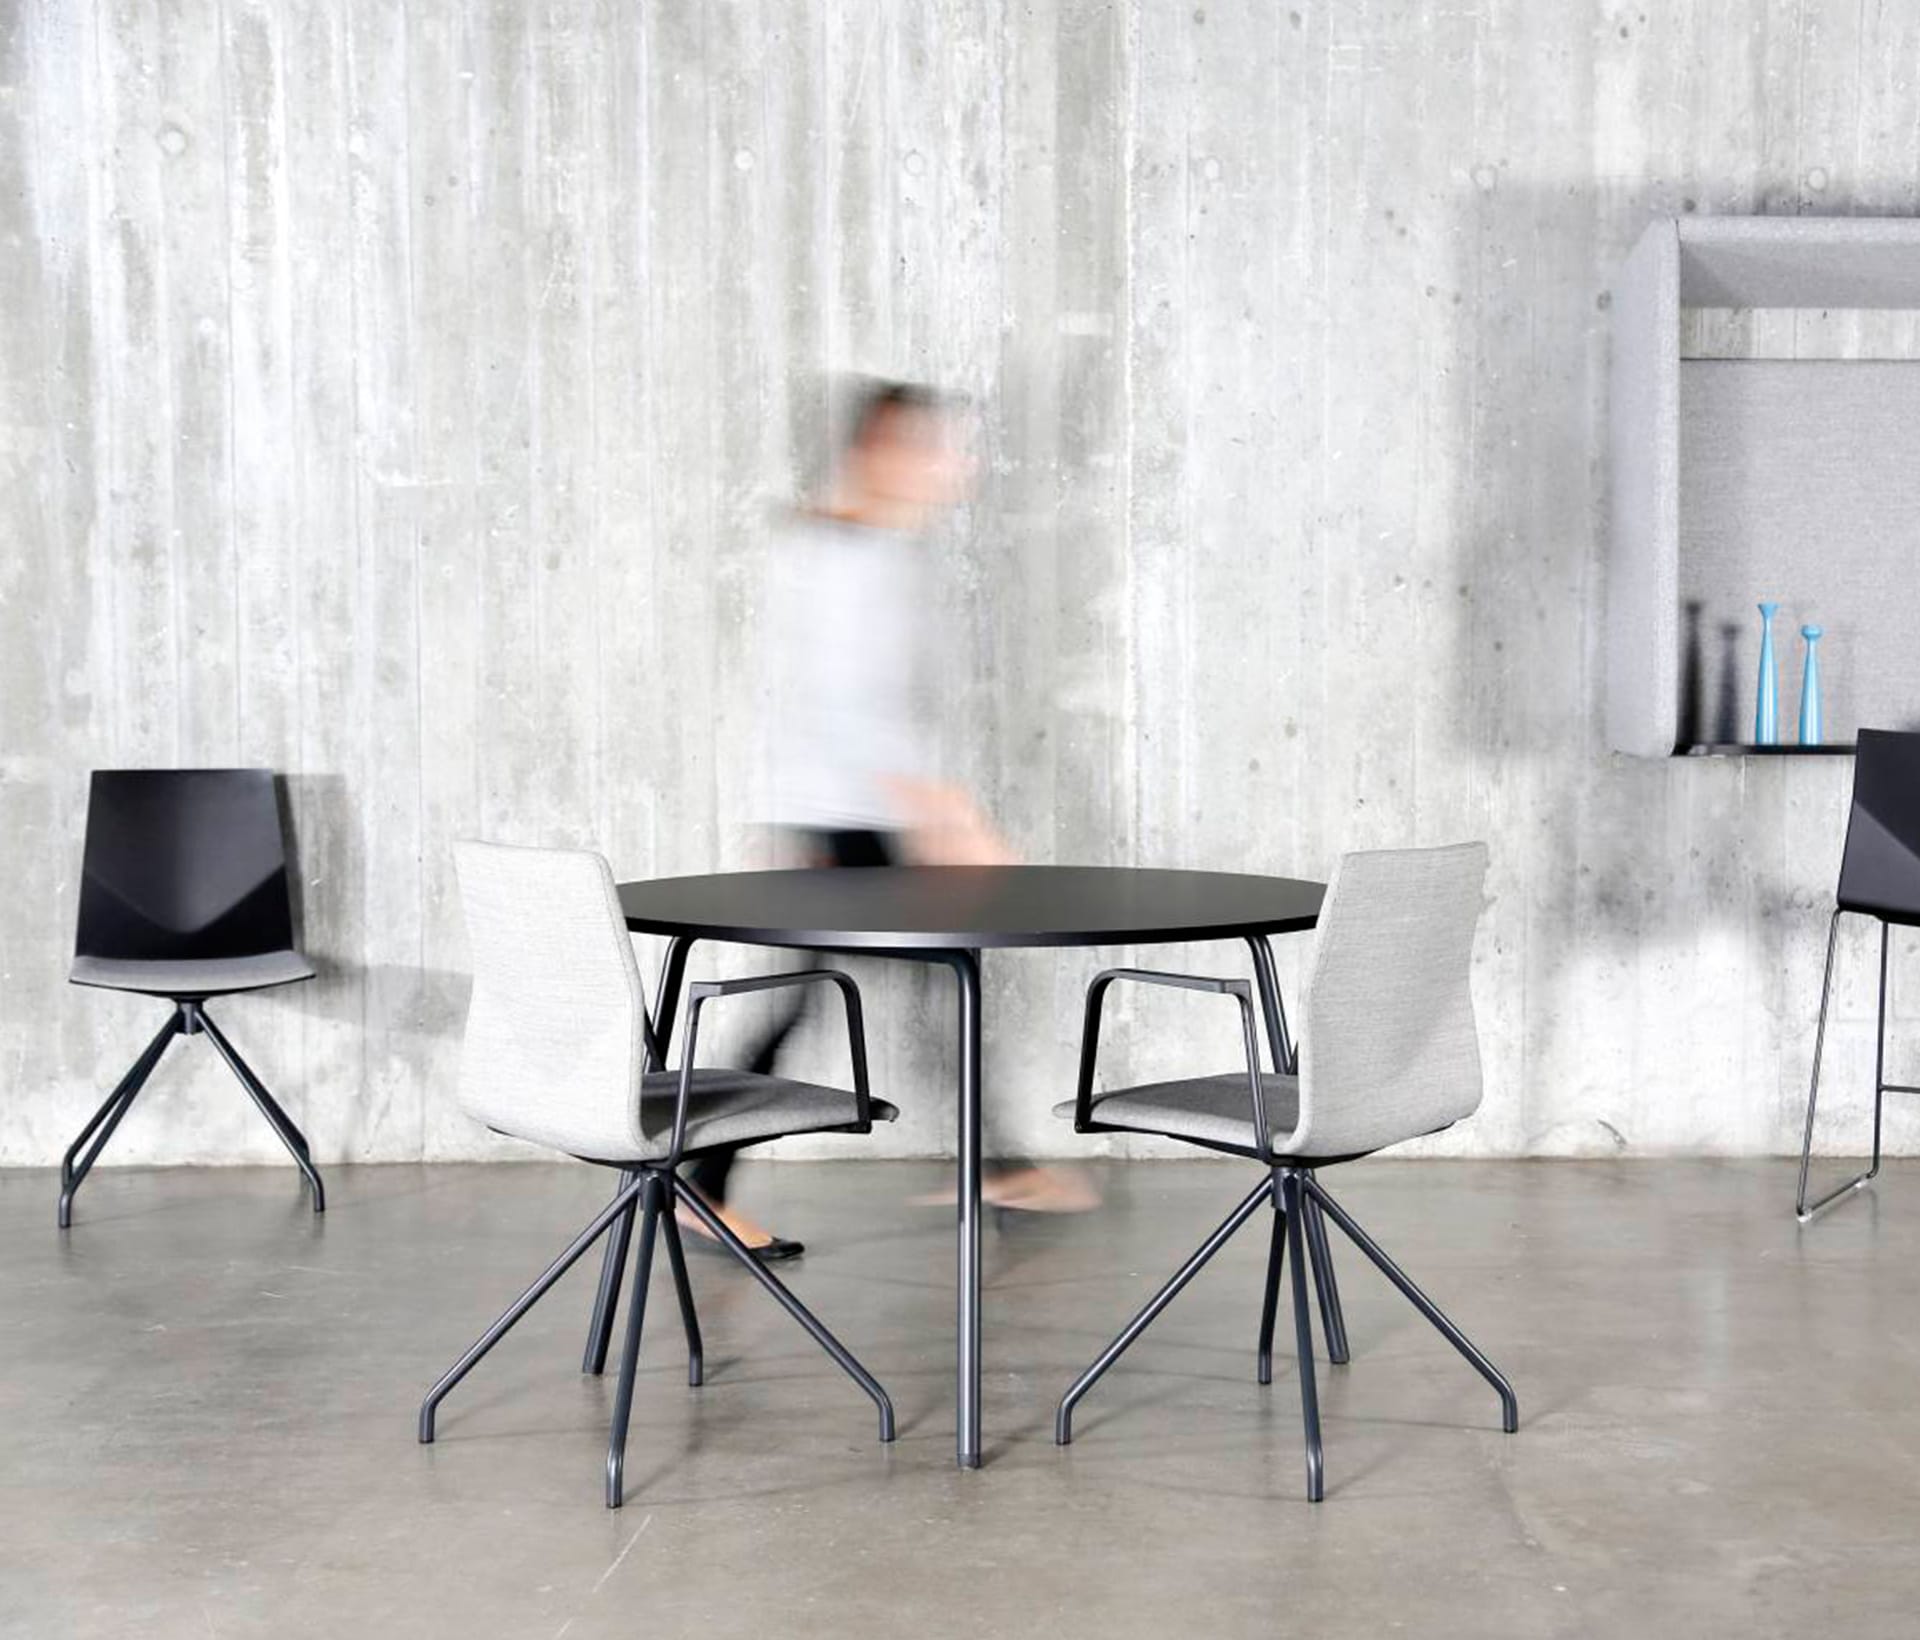 A table and chairs in a room with a concrete wall.